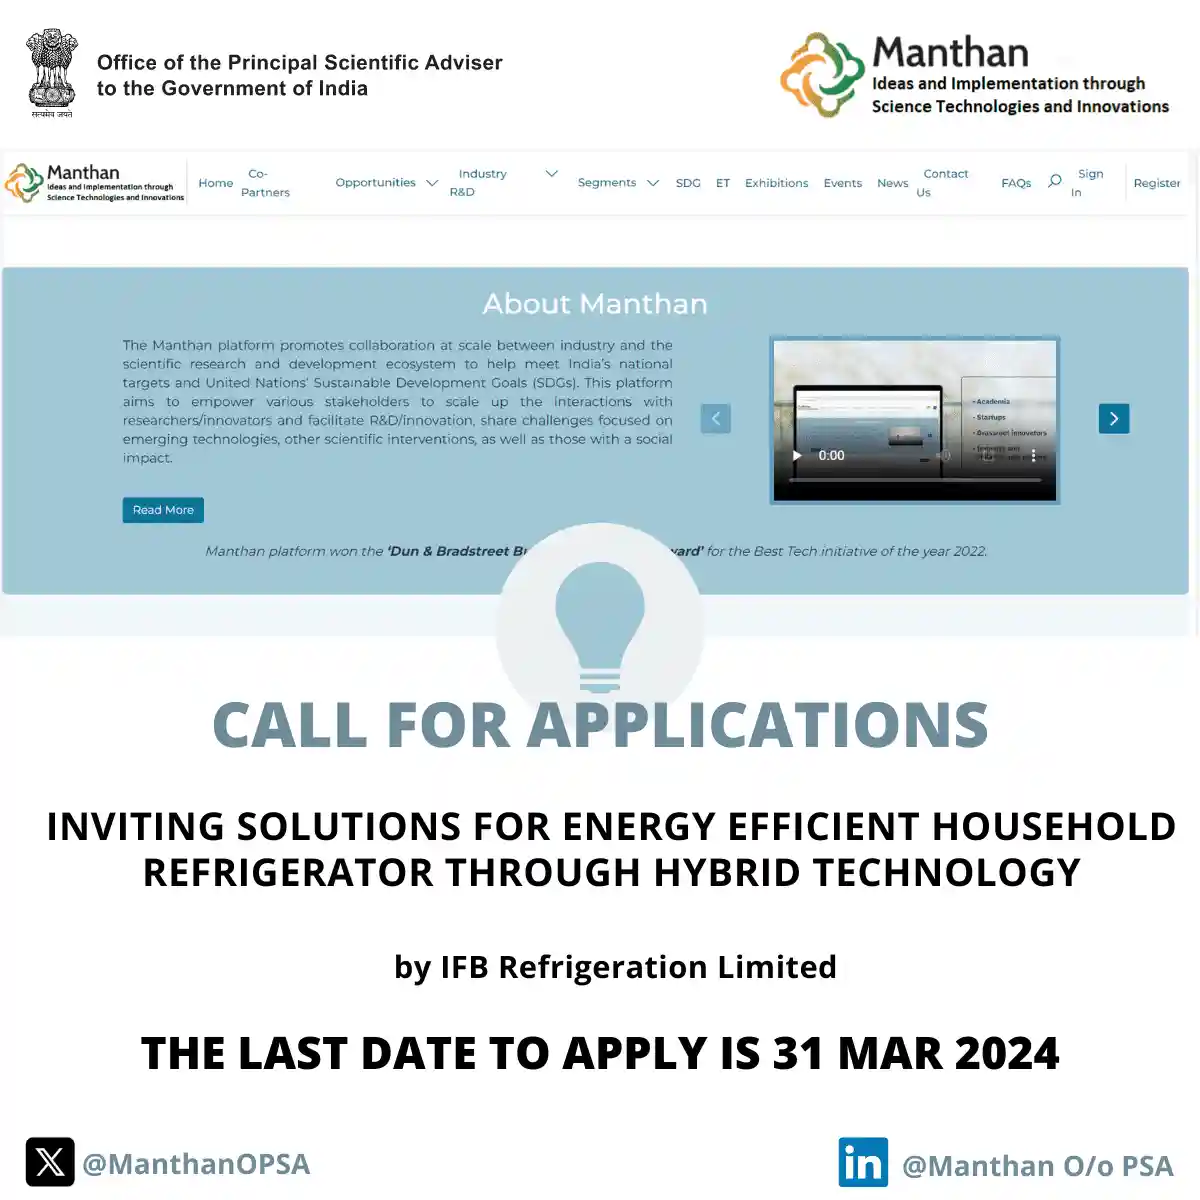 Inviting Solutions for Energy Efficient Household Refrigerator through hybrid technology by IFB Refrigeration Limited